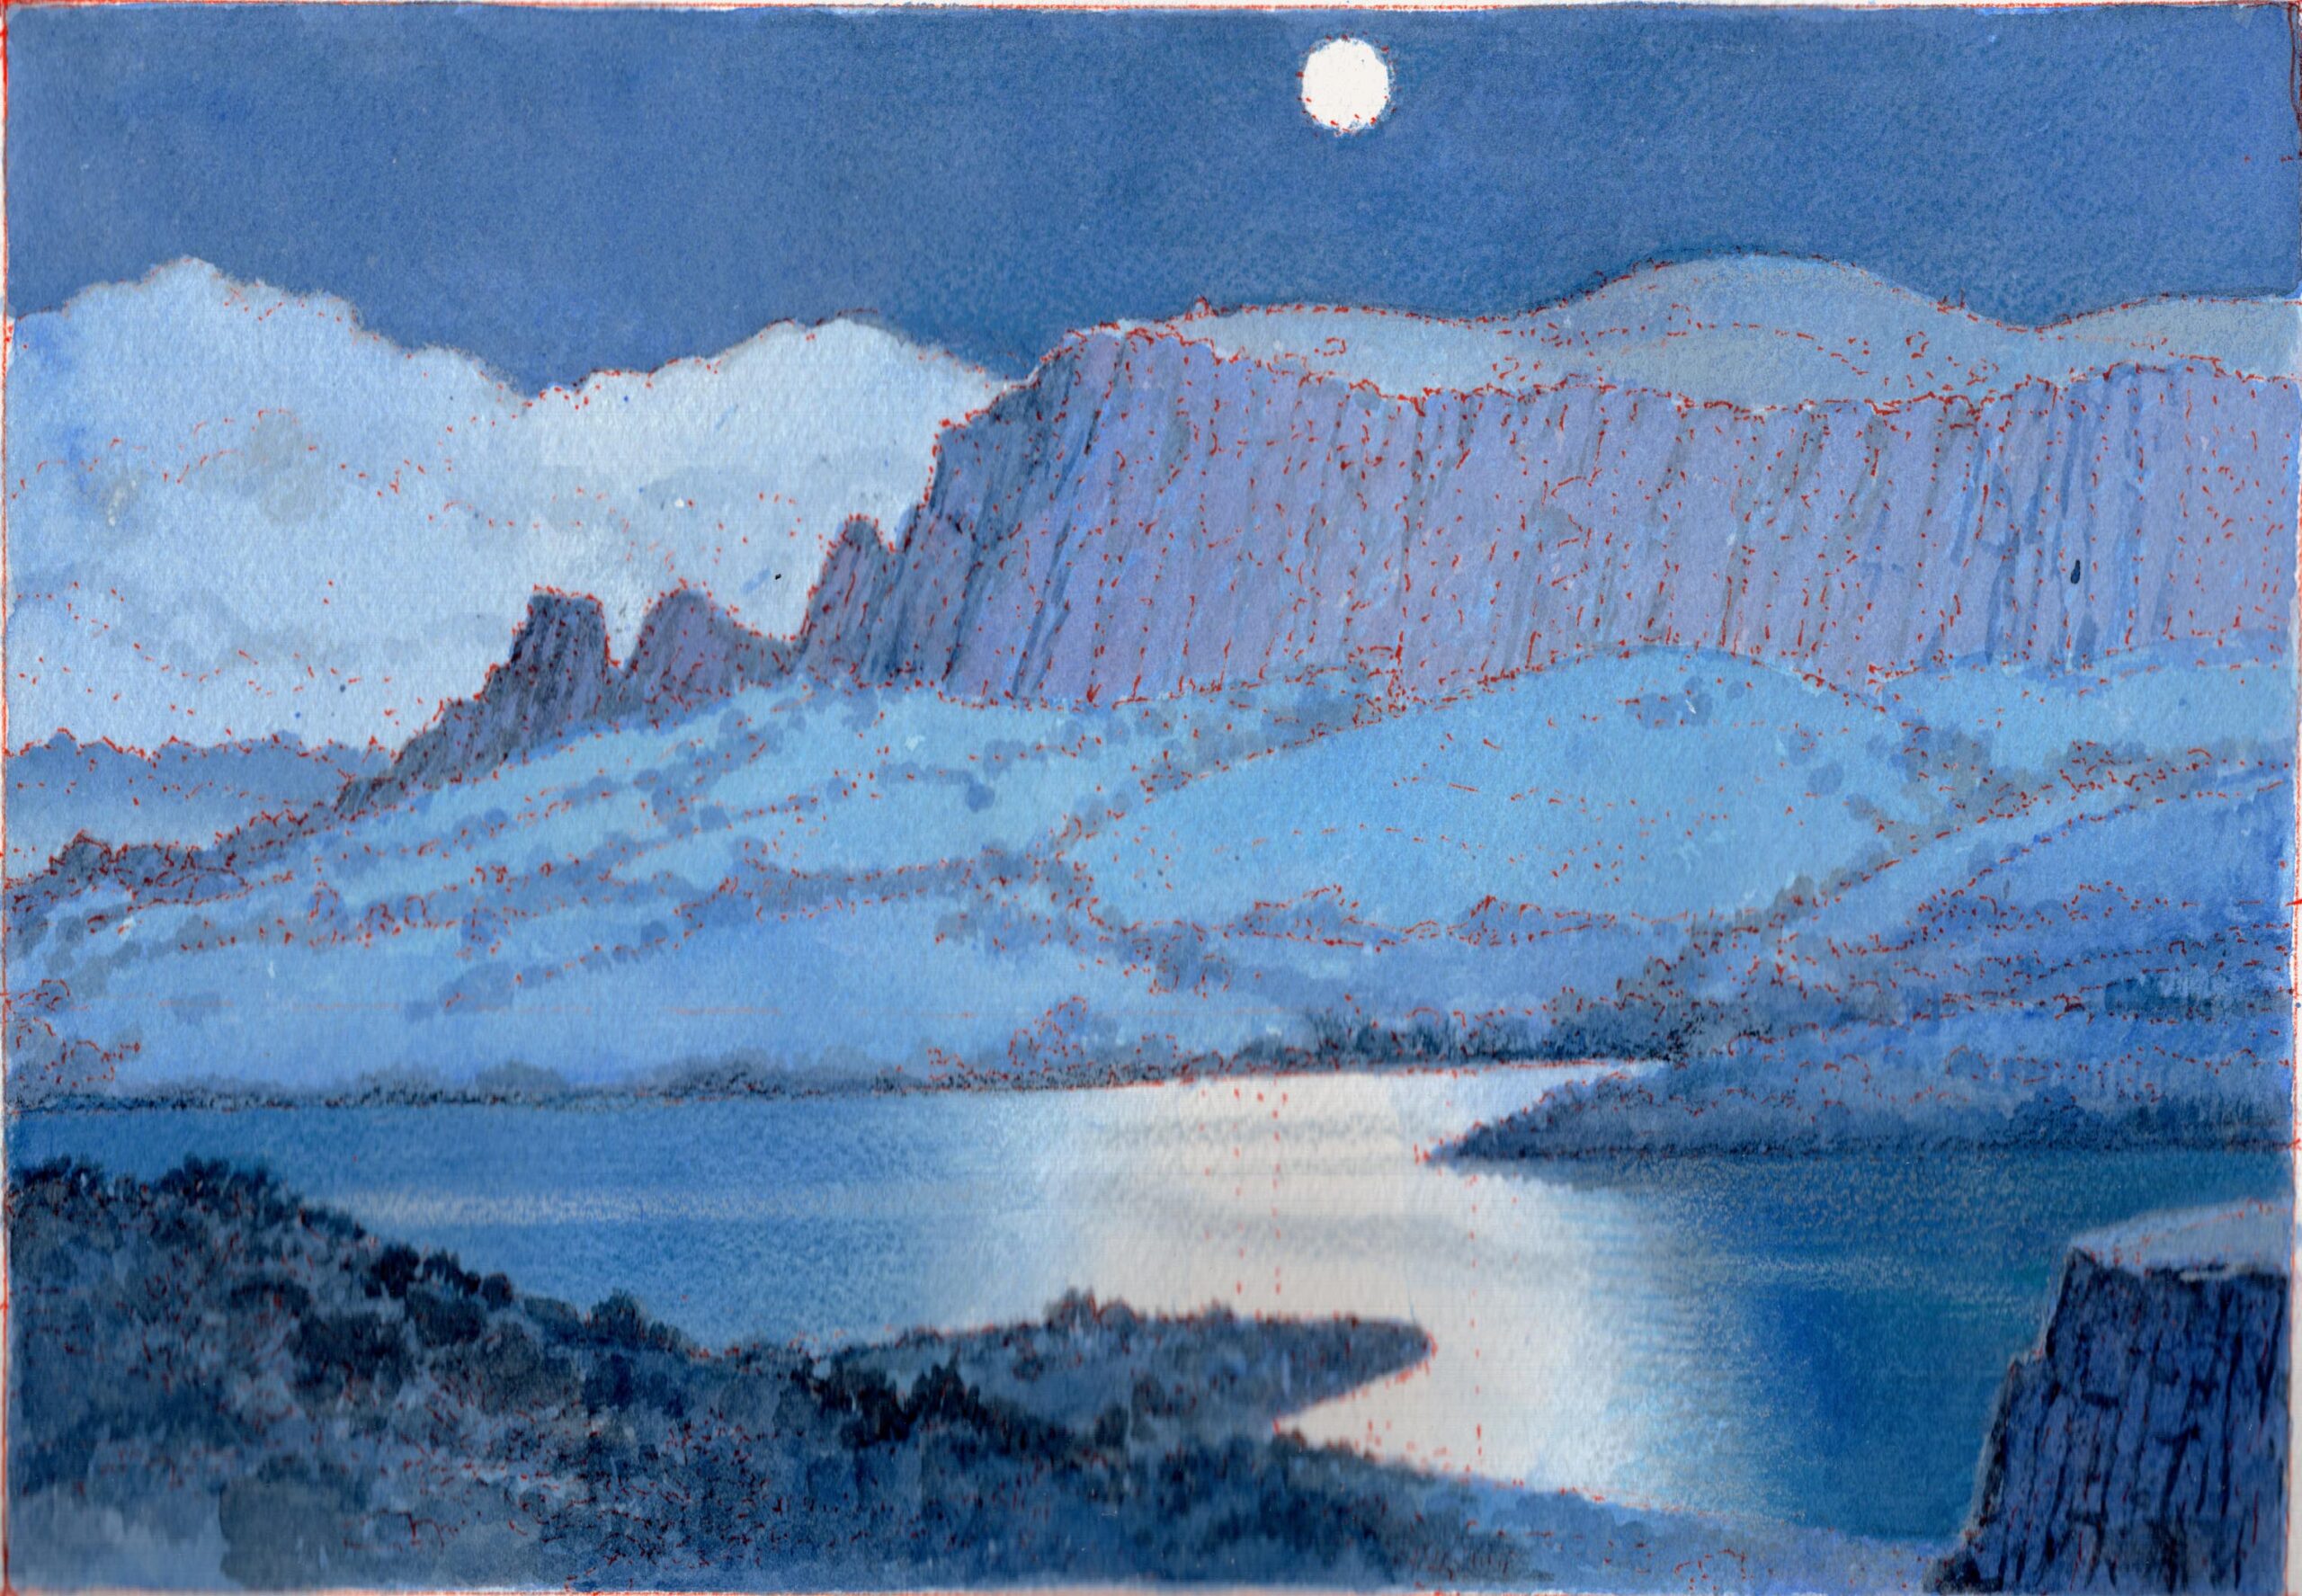 
							

									James McElhinney									Moonlight Lake 									watercolor on paper<br />
7 x 10 inches									


							